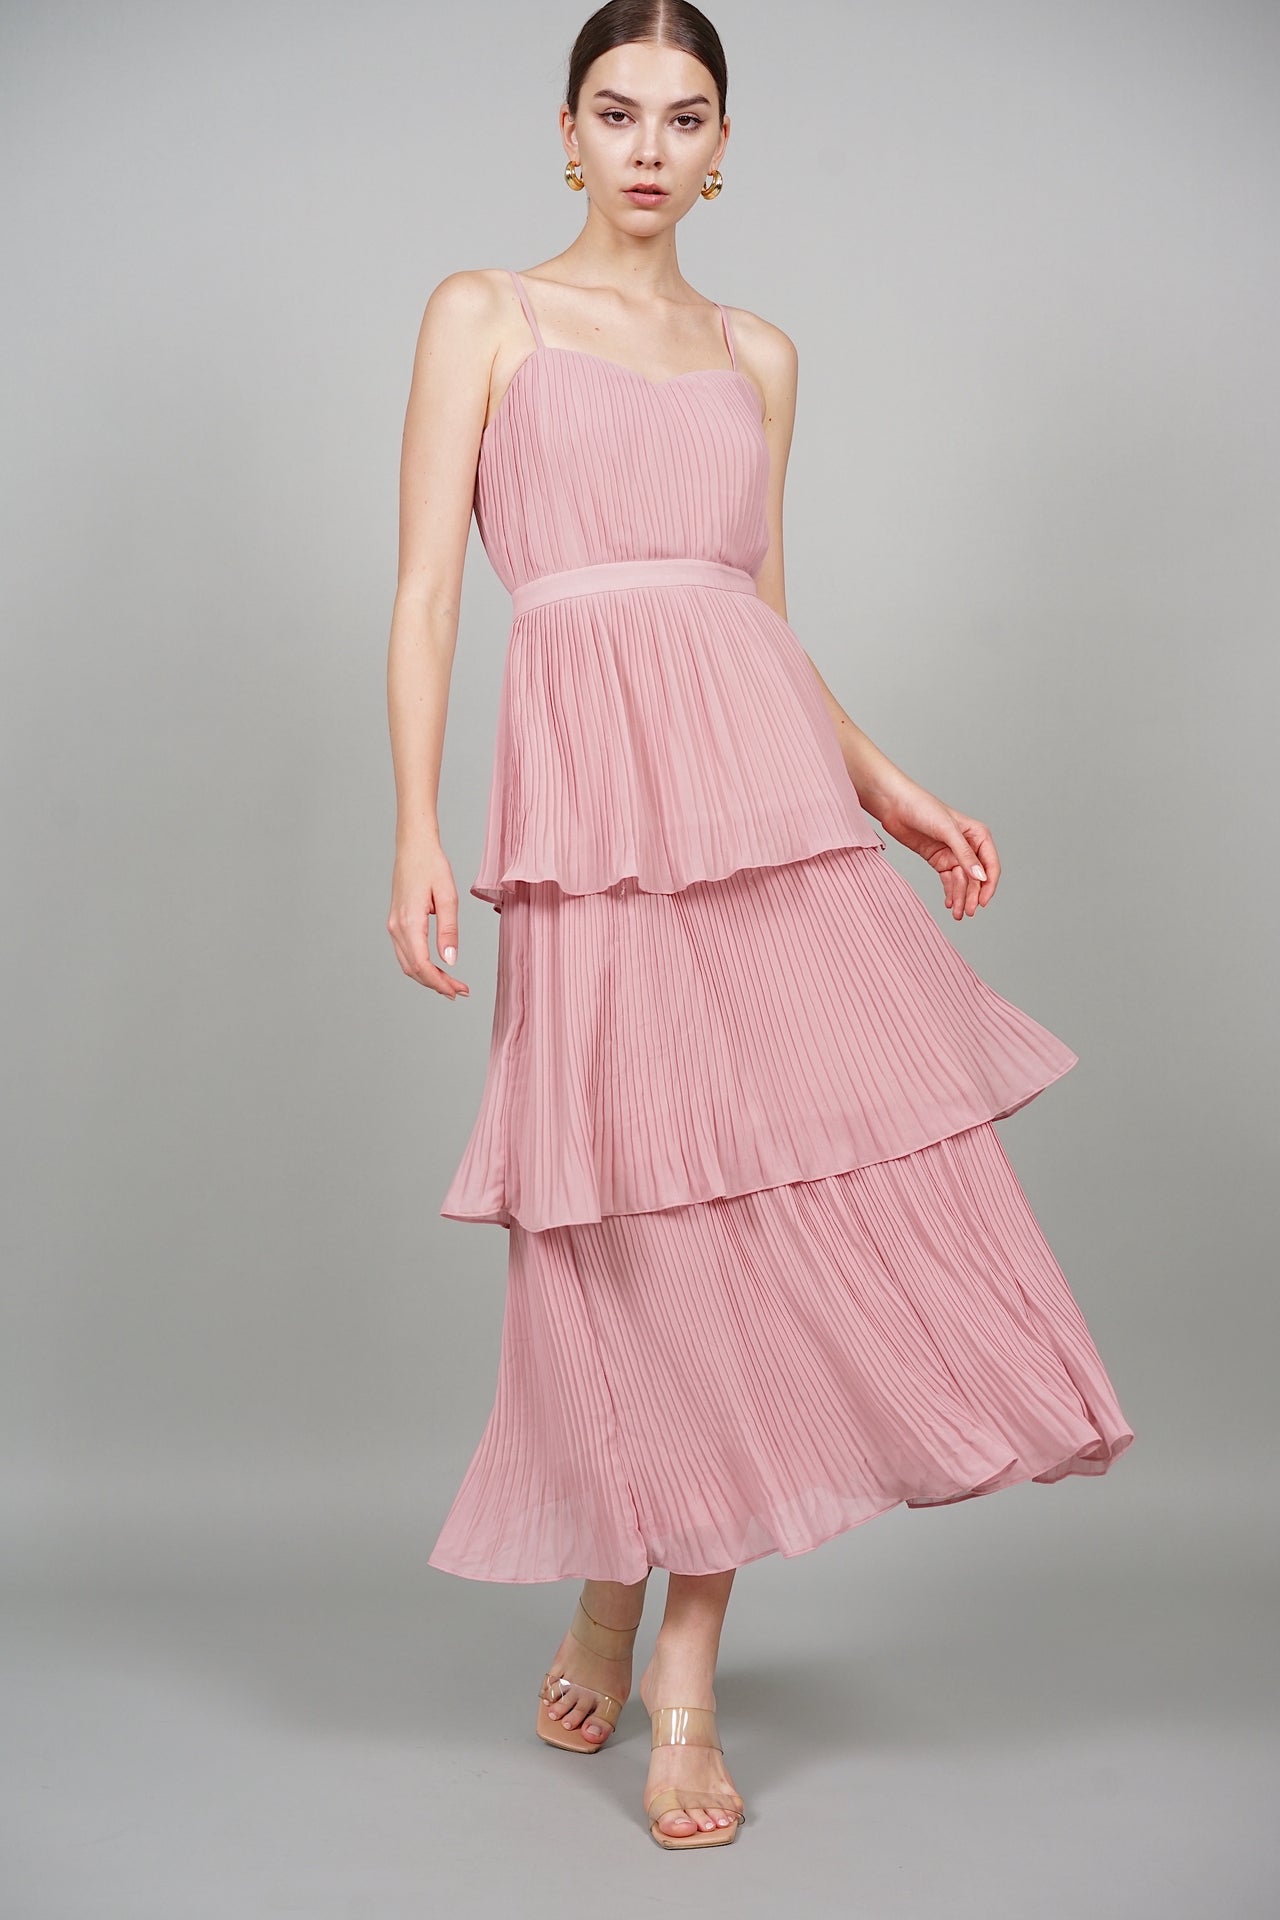 Wendy Tiered Dress in Pink